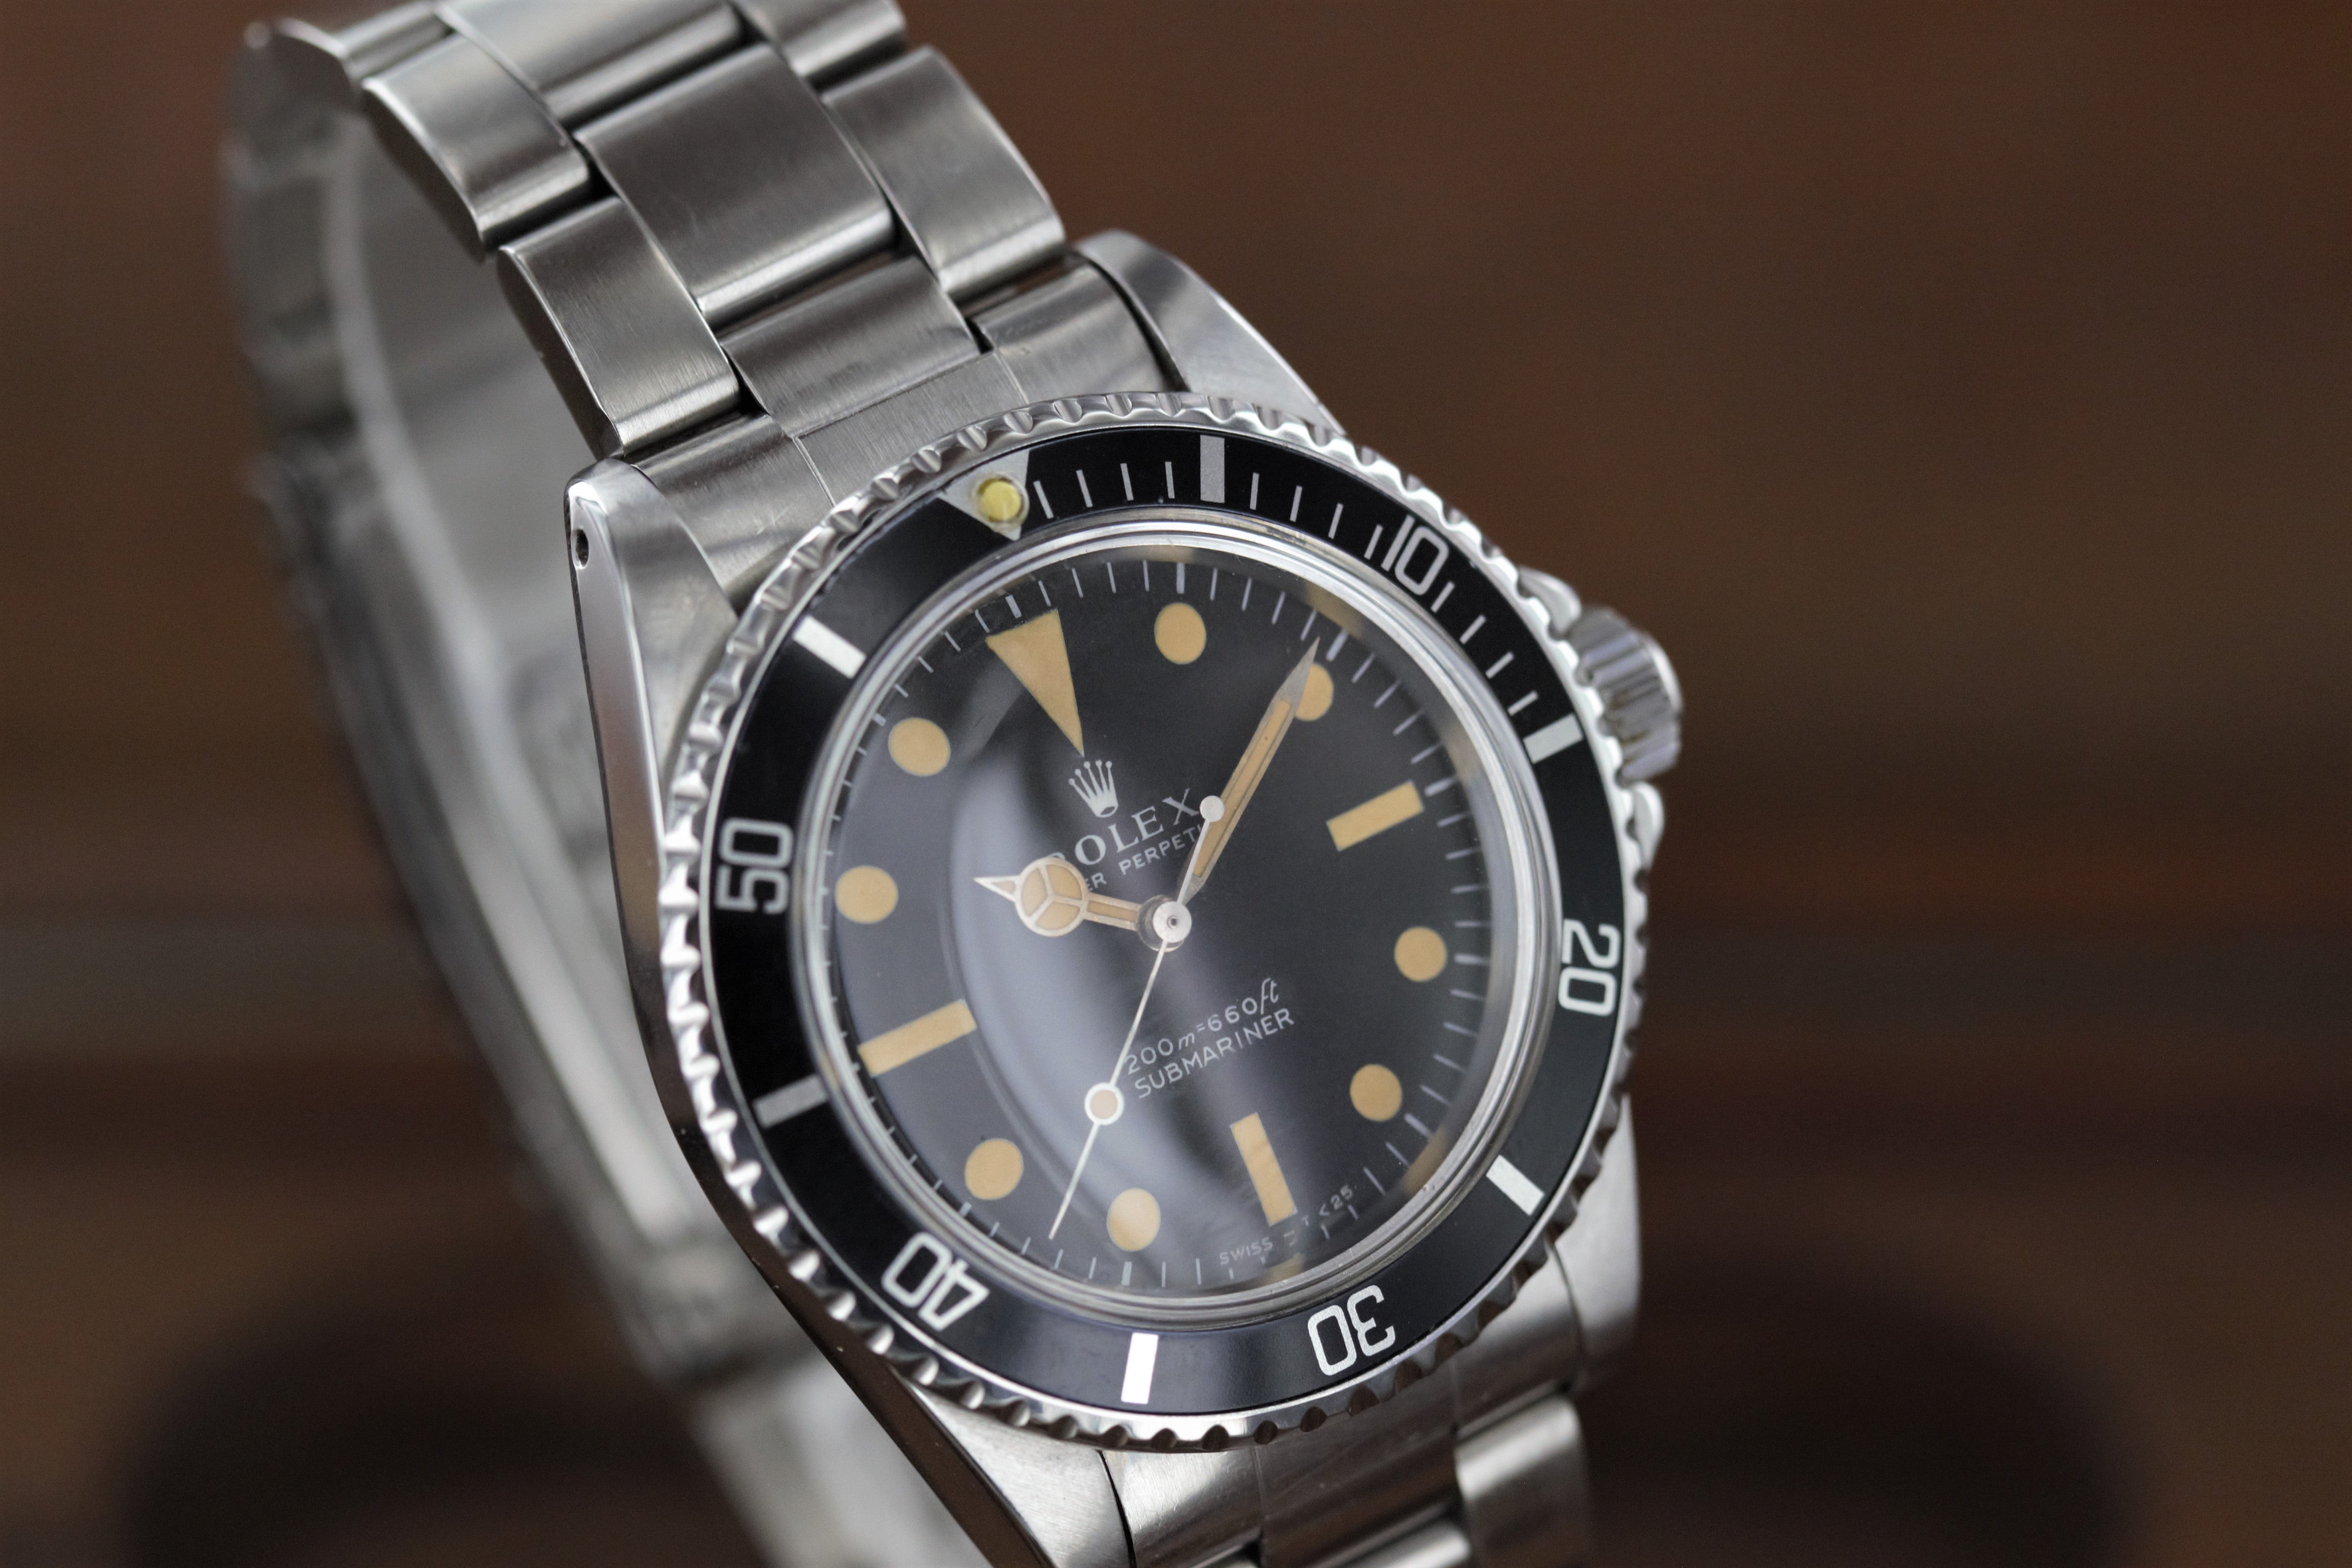 Rolex Oyster Perpetual submariner Ref.5513 Meters First from 1968